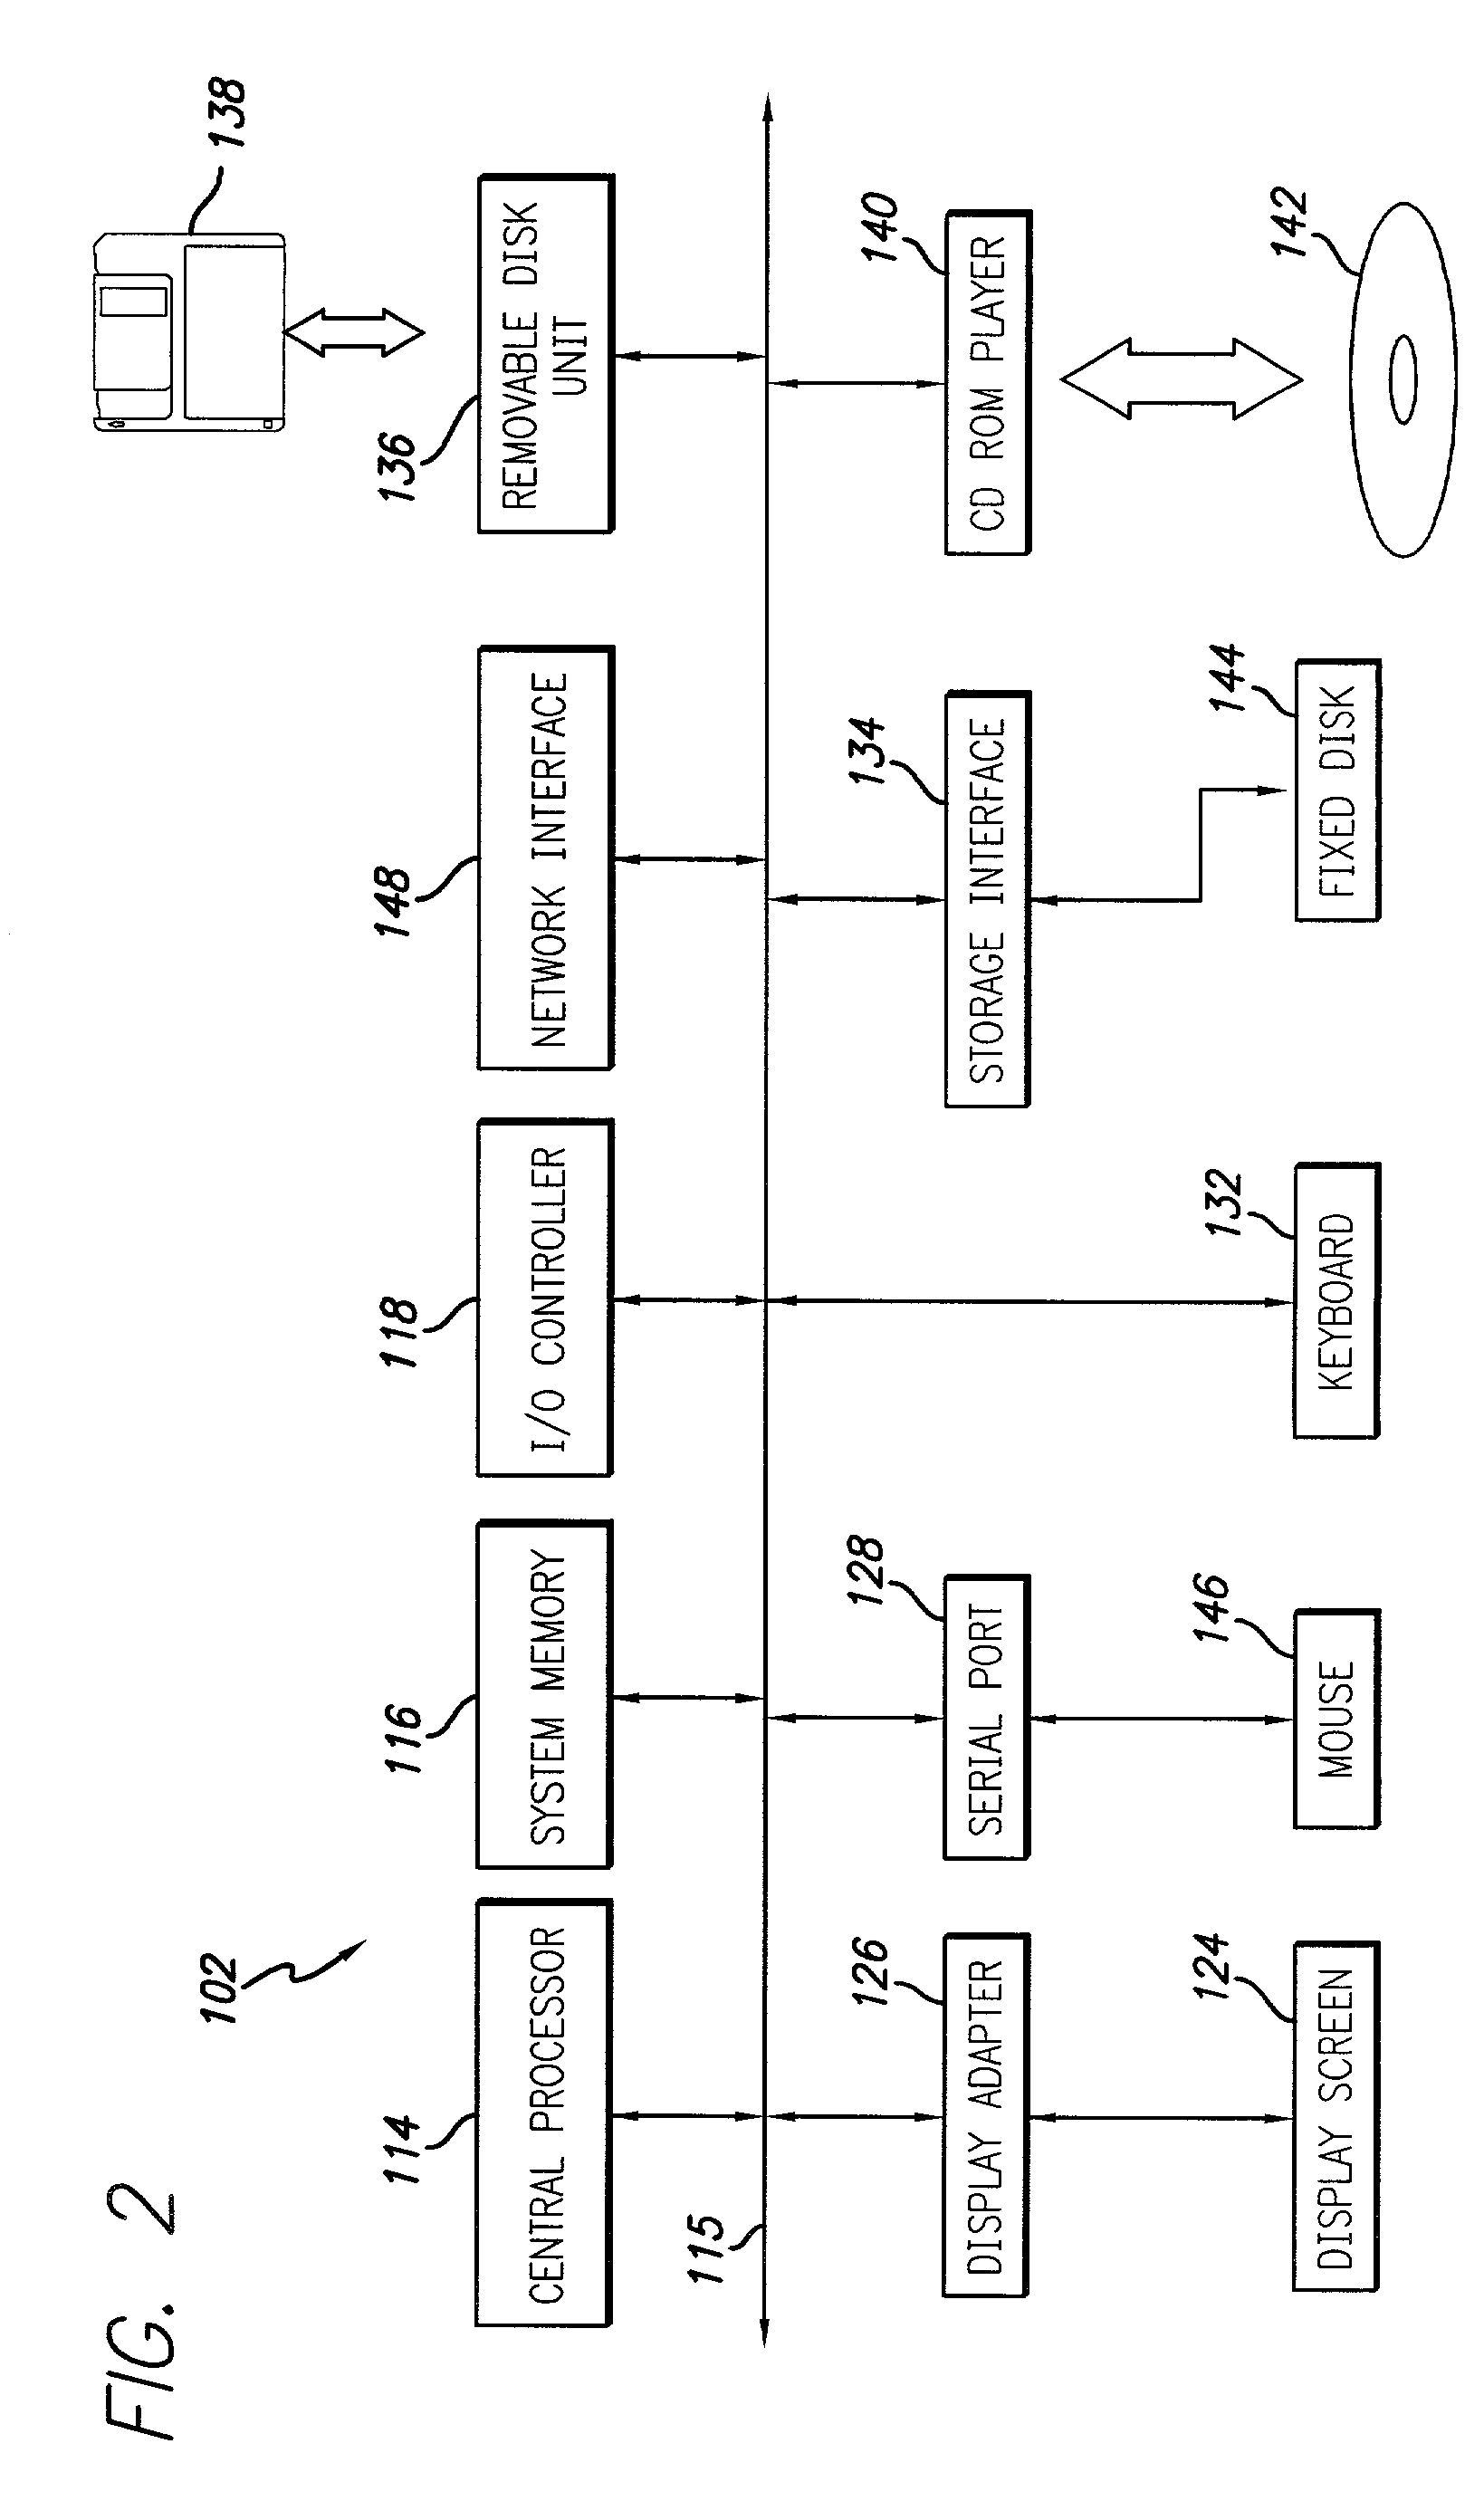 Method and system for managing event attributes